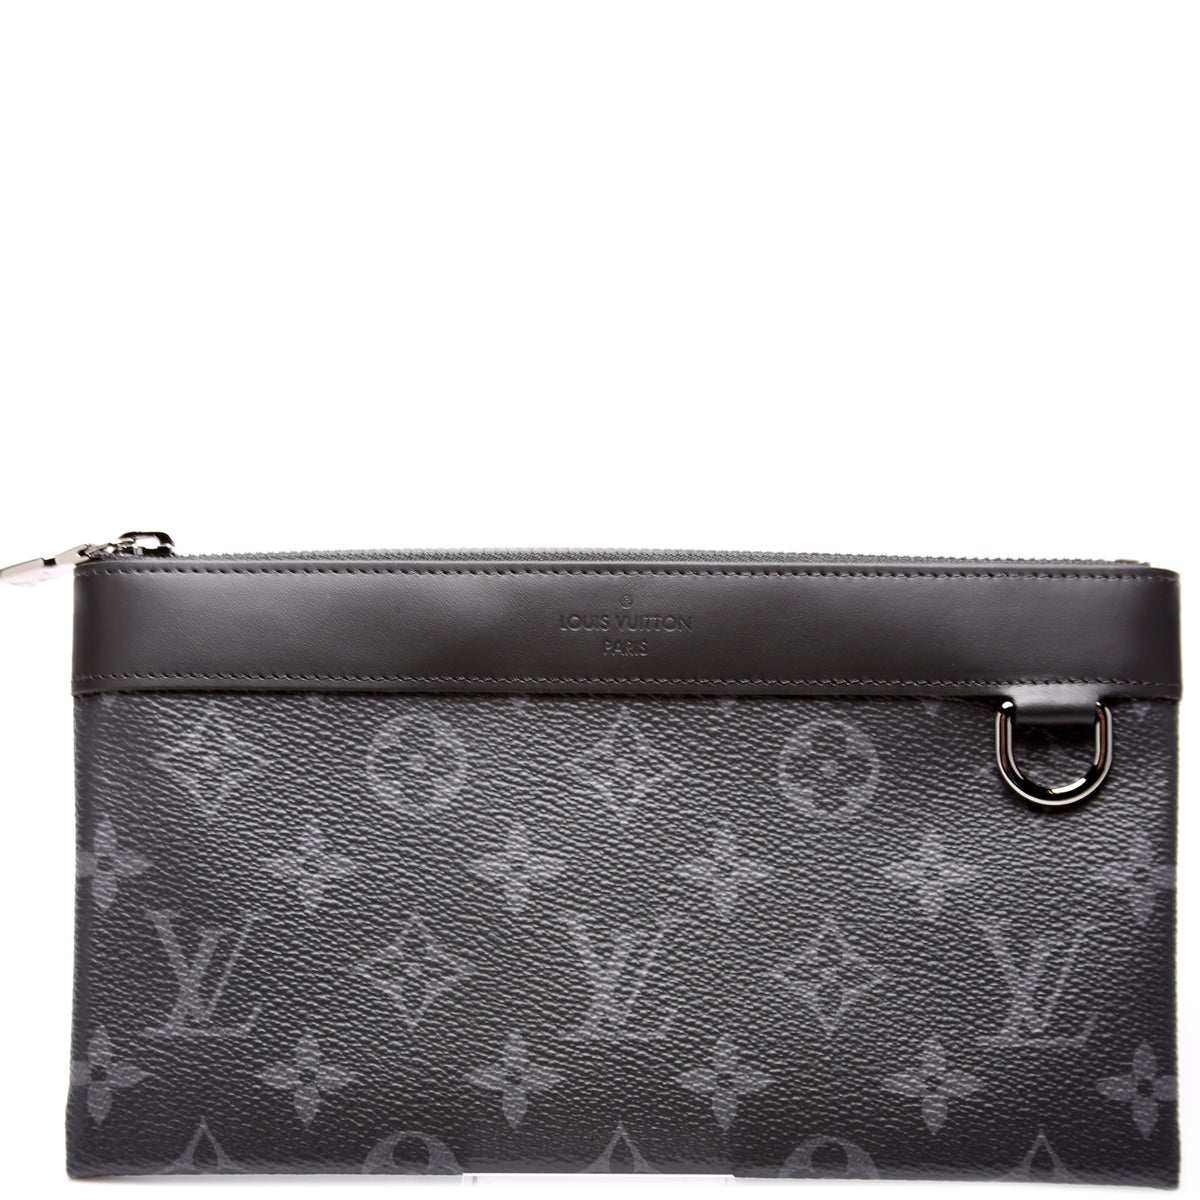 LOUIS VUITTON LV Pochette Discovery PM Used Clutch Monogram